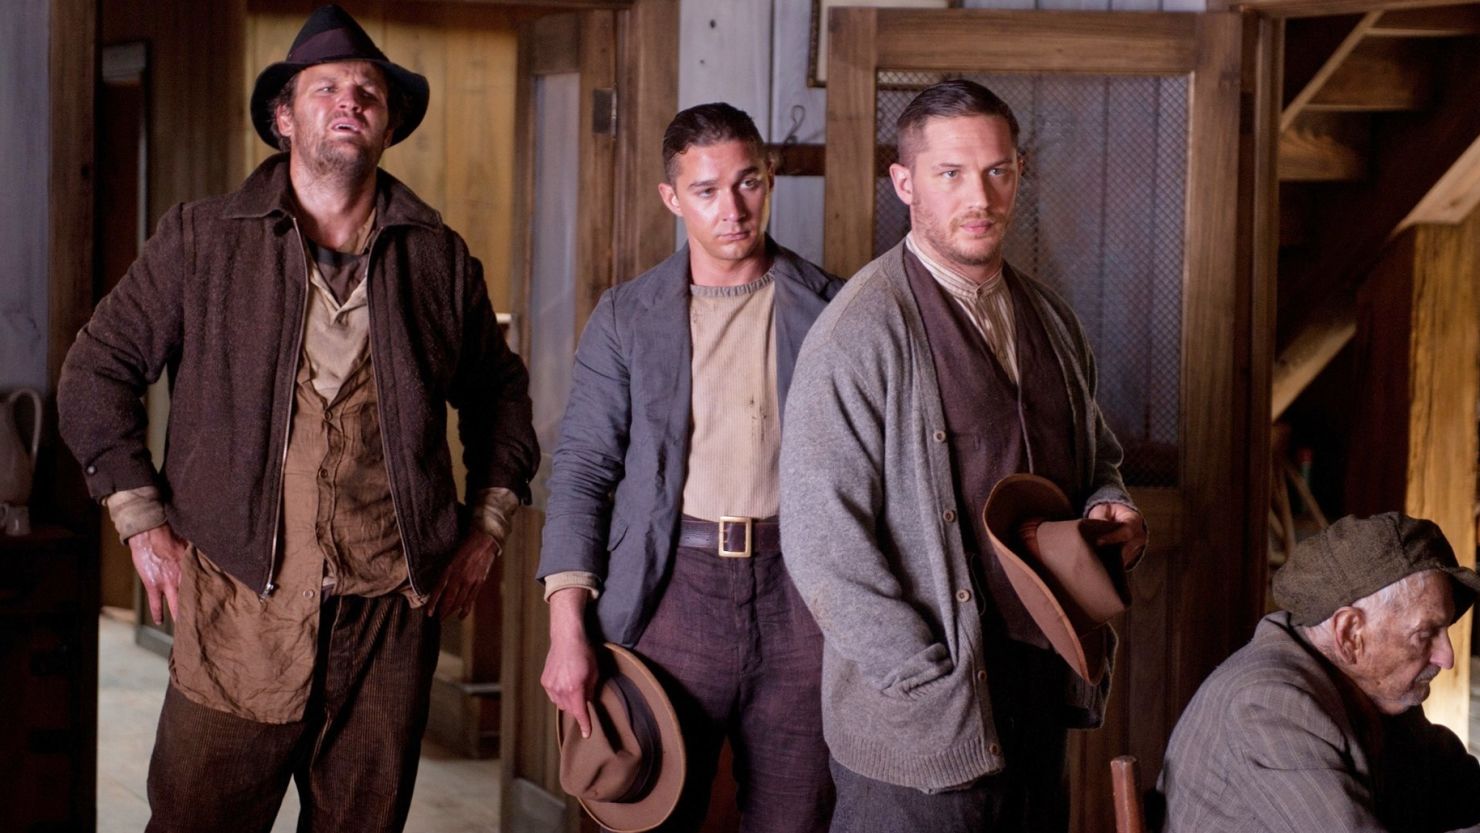 Tom Hardy stars in "Lawless," written by Nick Cave and directed by John Hillcoat.